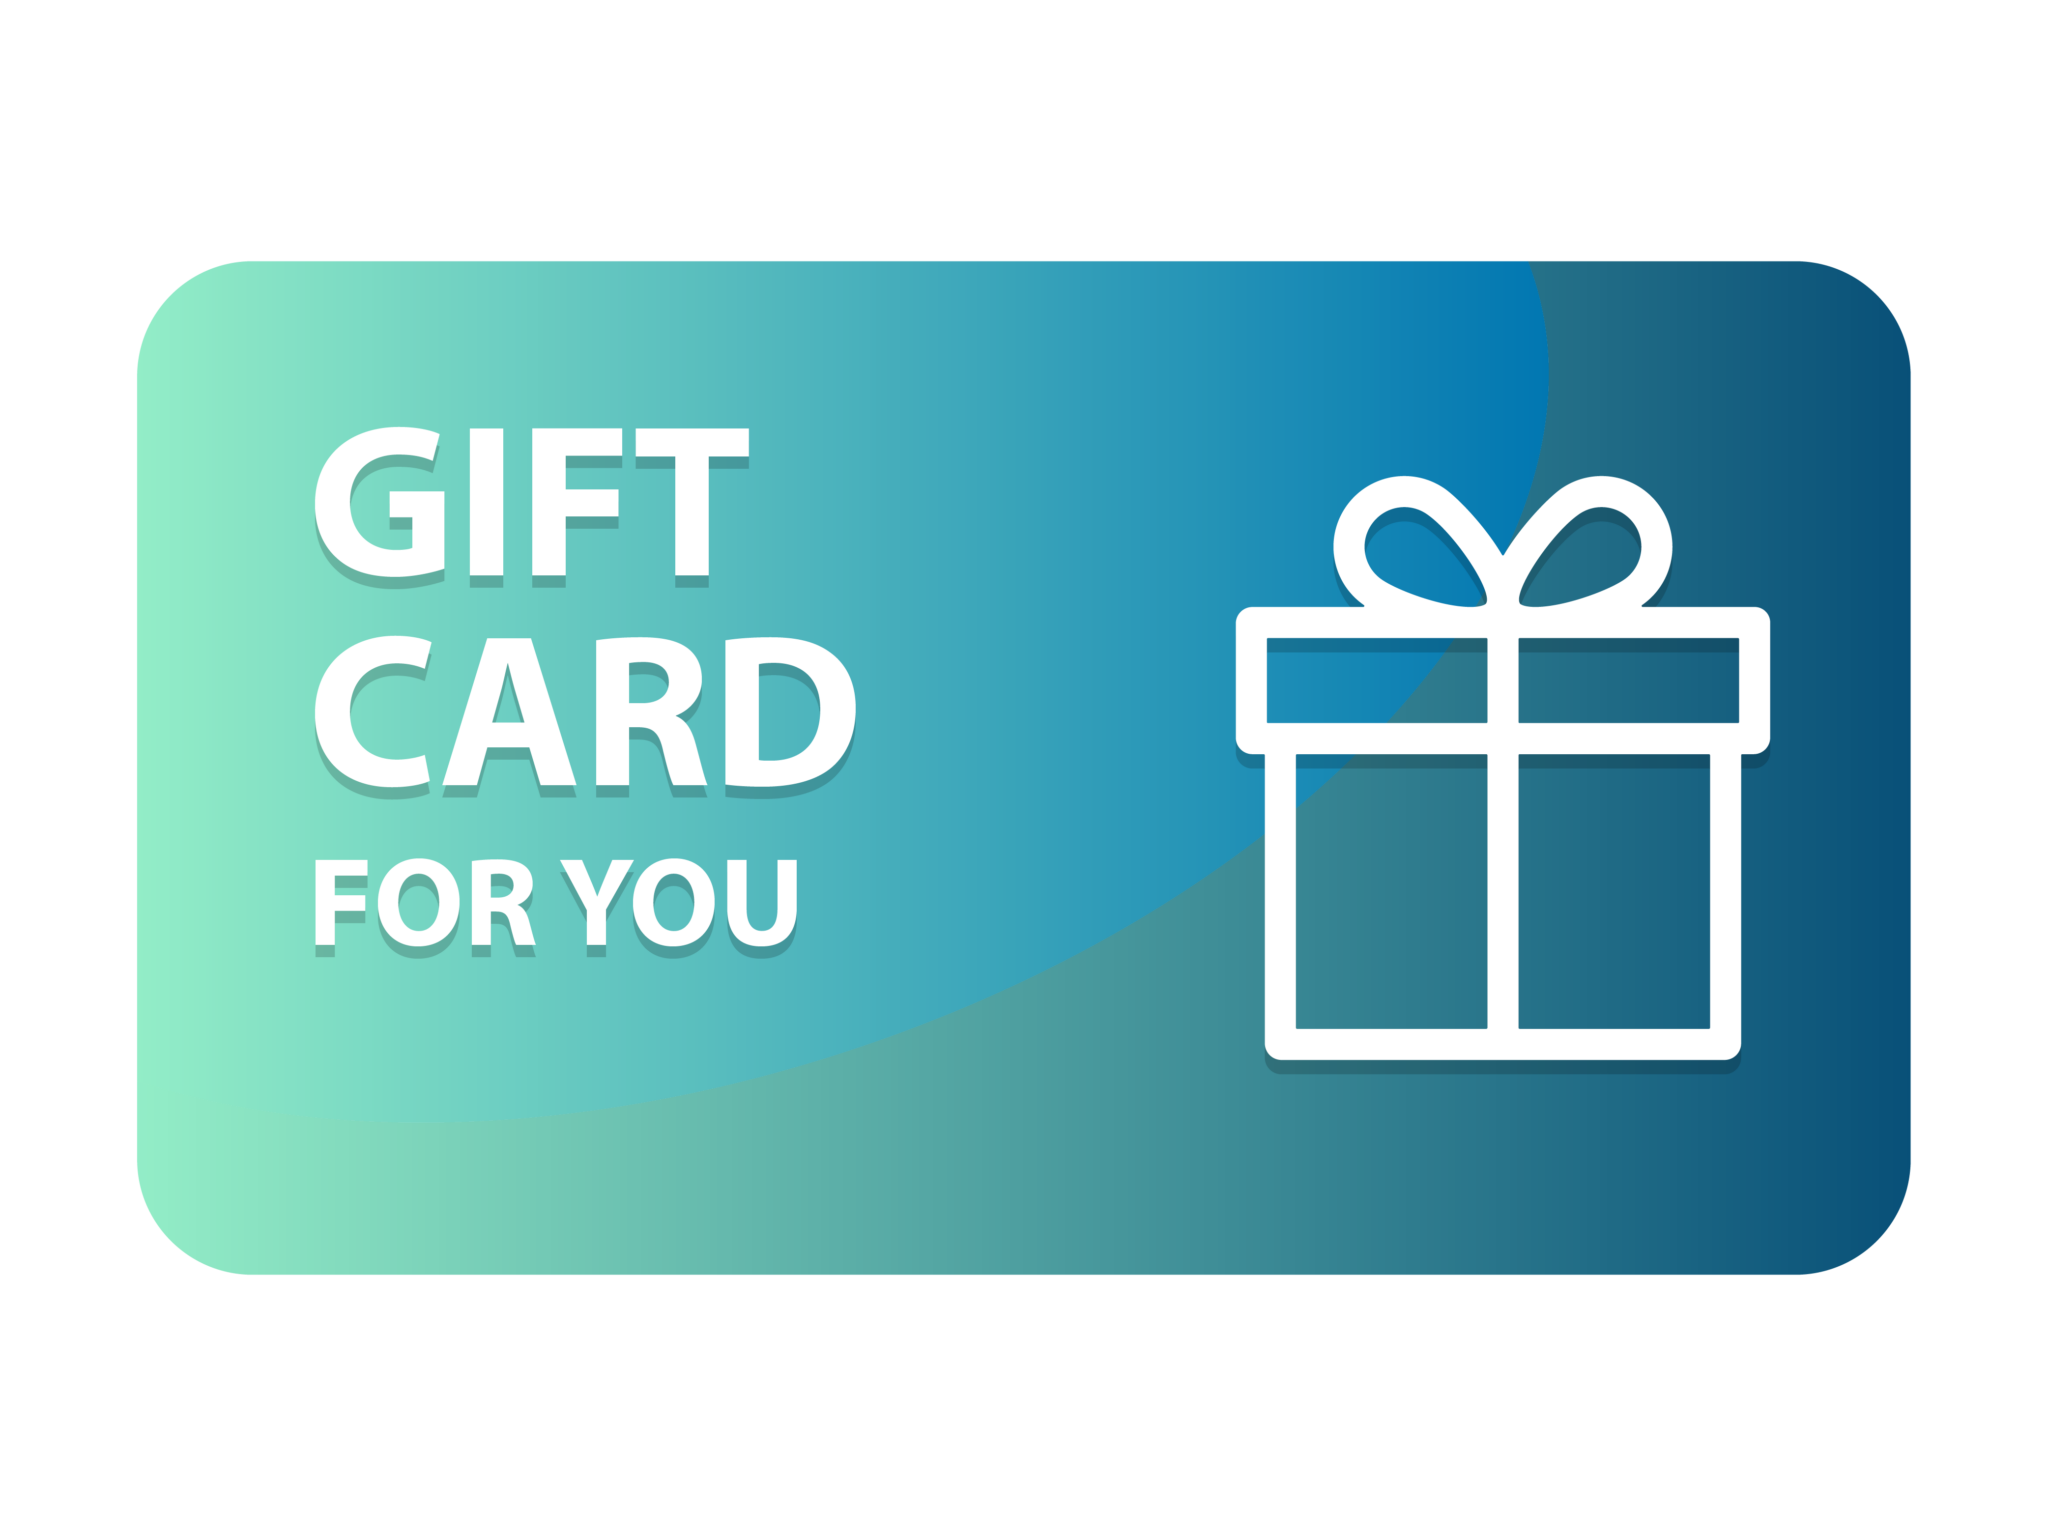 An image of gift cards suggests available gifting options or promotional offers.